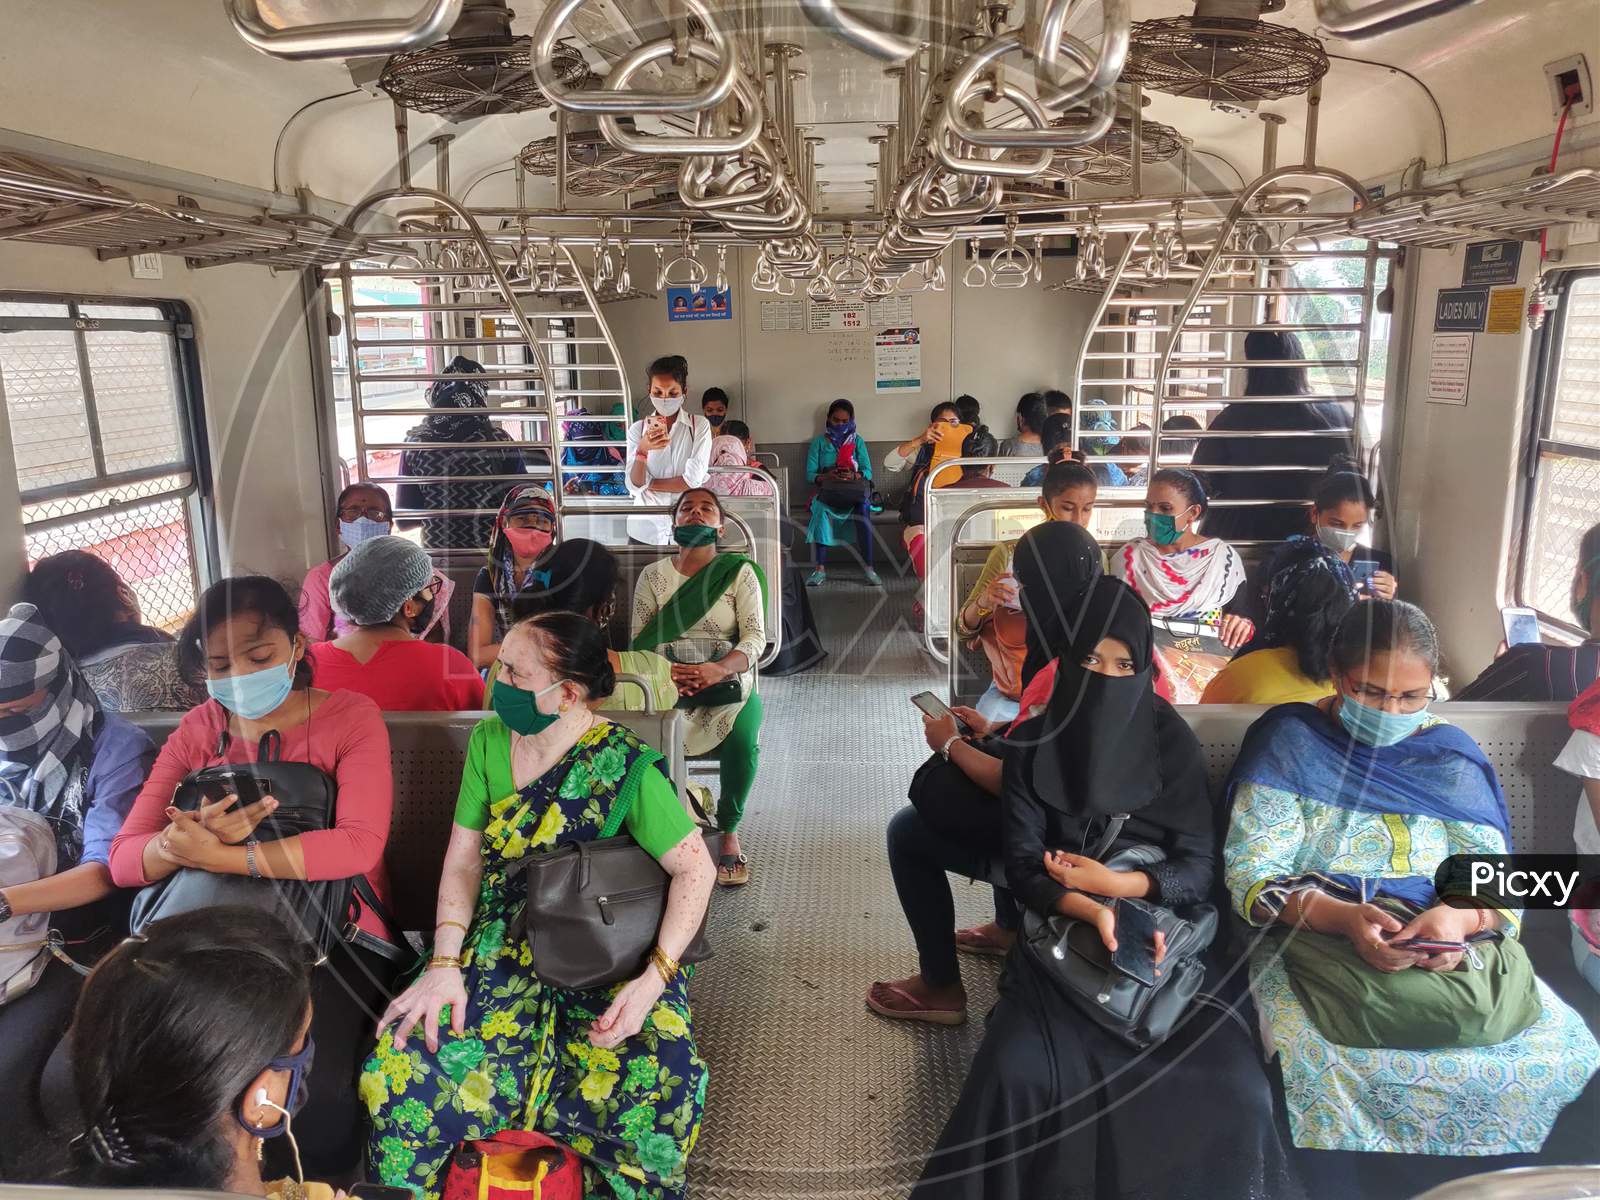 Women wearing protective face masks commute in a suburban train after authorities resumed the train services for women passengers during non-peak hours, amidst the coronavirus disease (COVID-19) outbreak, in Mumbai, India, 2020.